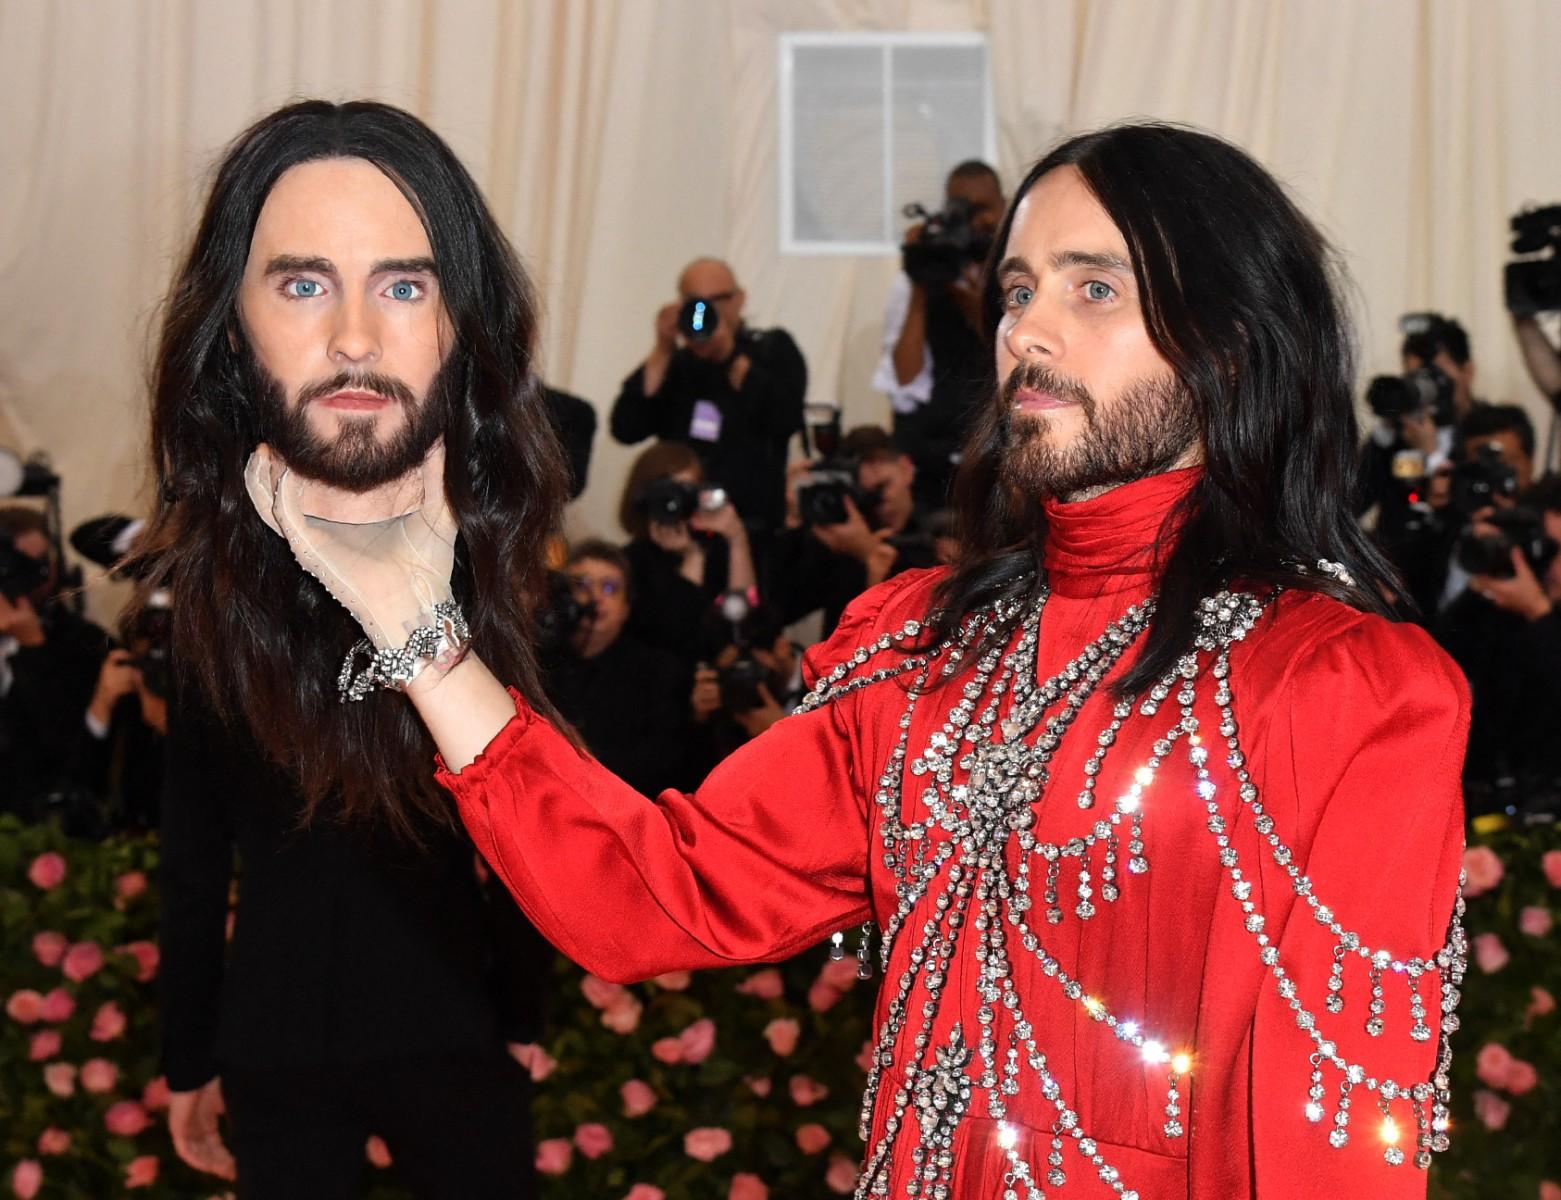 In 2019, Jared Leto brought a lifelike model of his own head to the MET Gala, sparking debate over whether it was camp or not, but it was undoubtedly iconic.